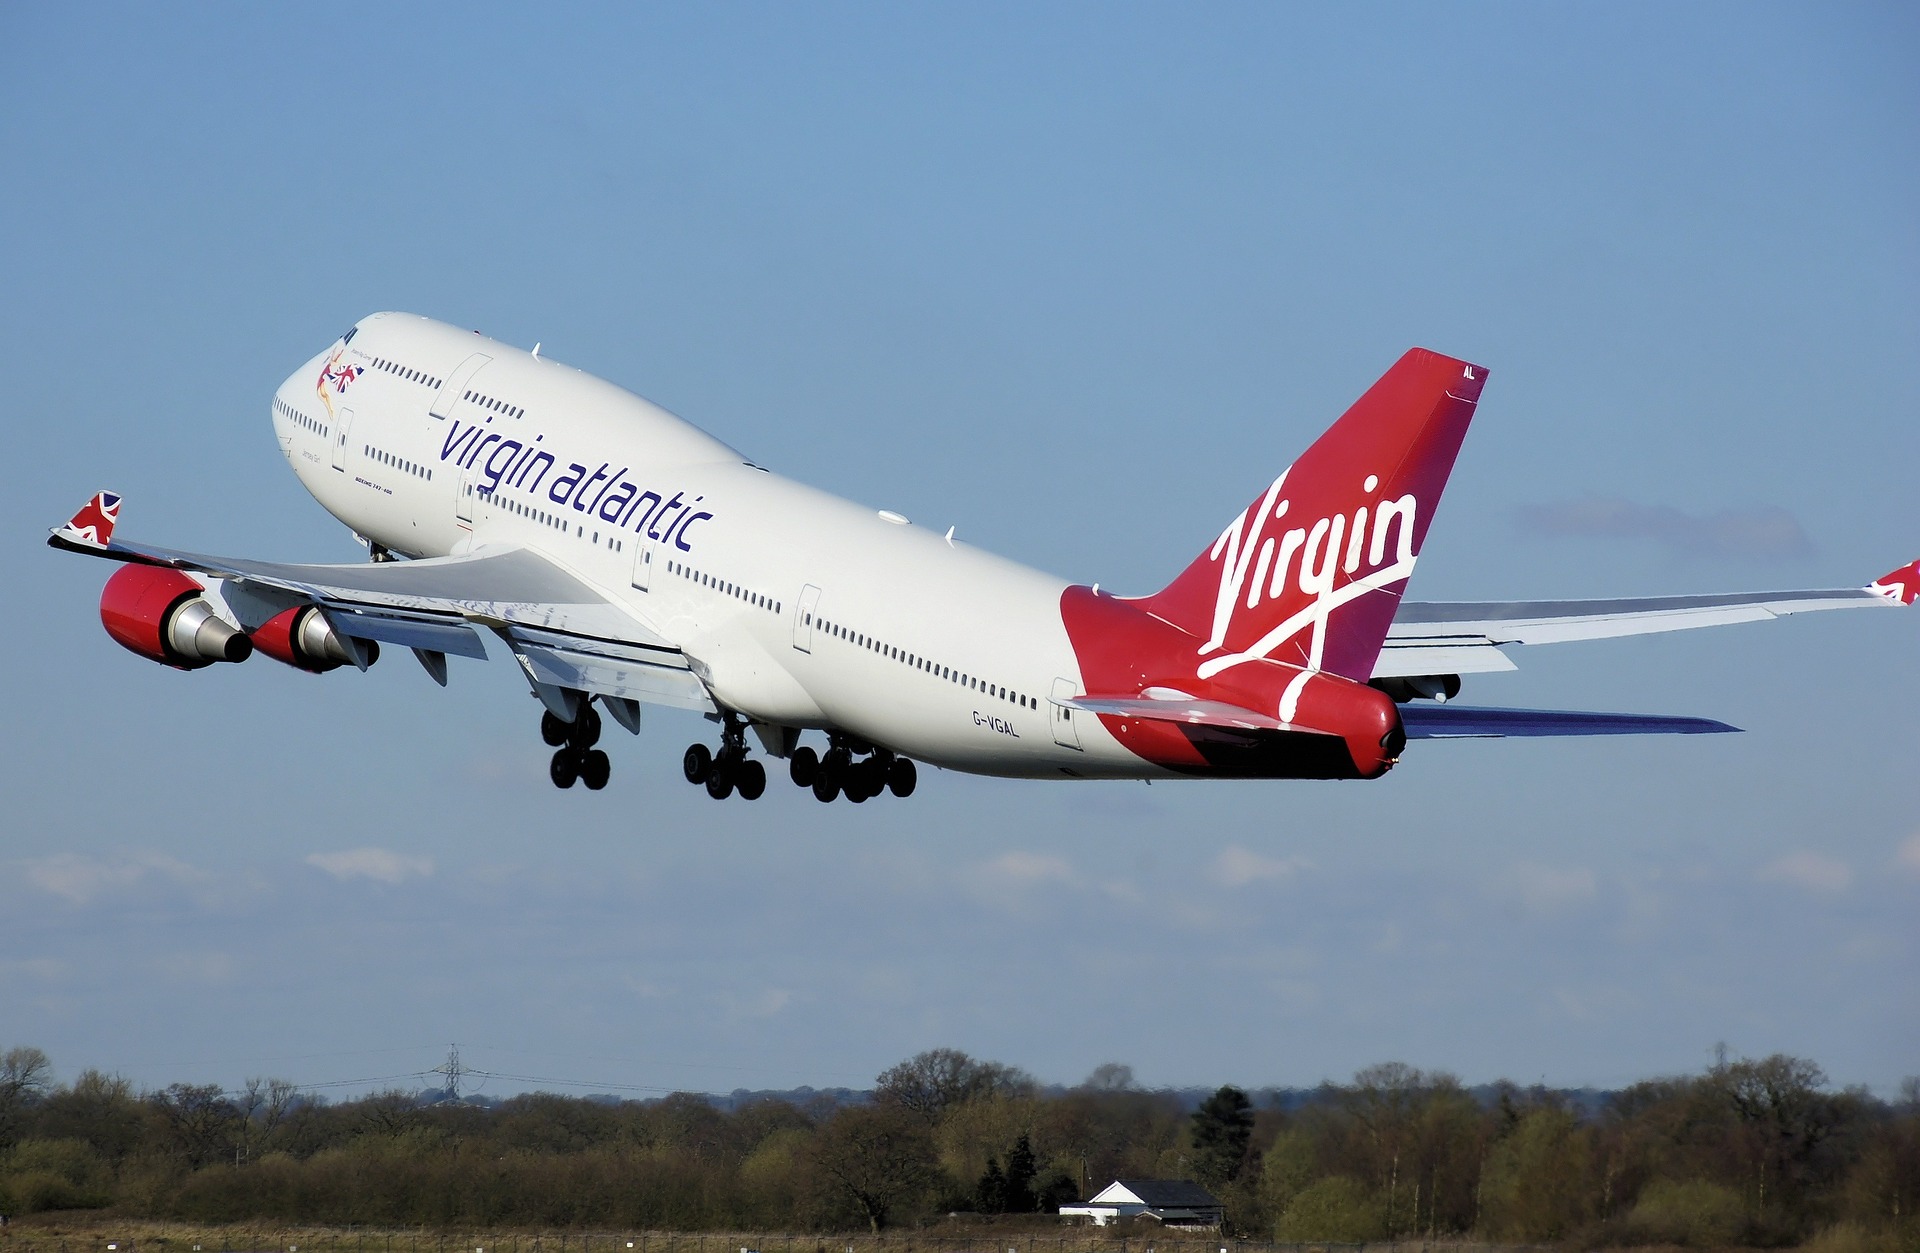 Virgin Atlantic allows you to pay in miles at cheap rates for lap infants